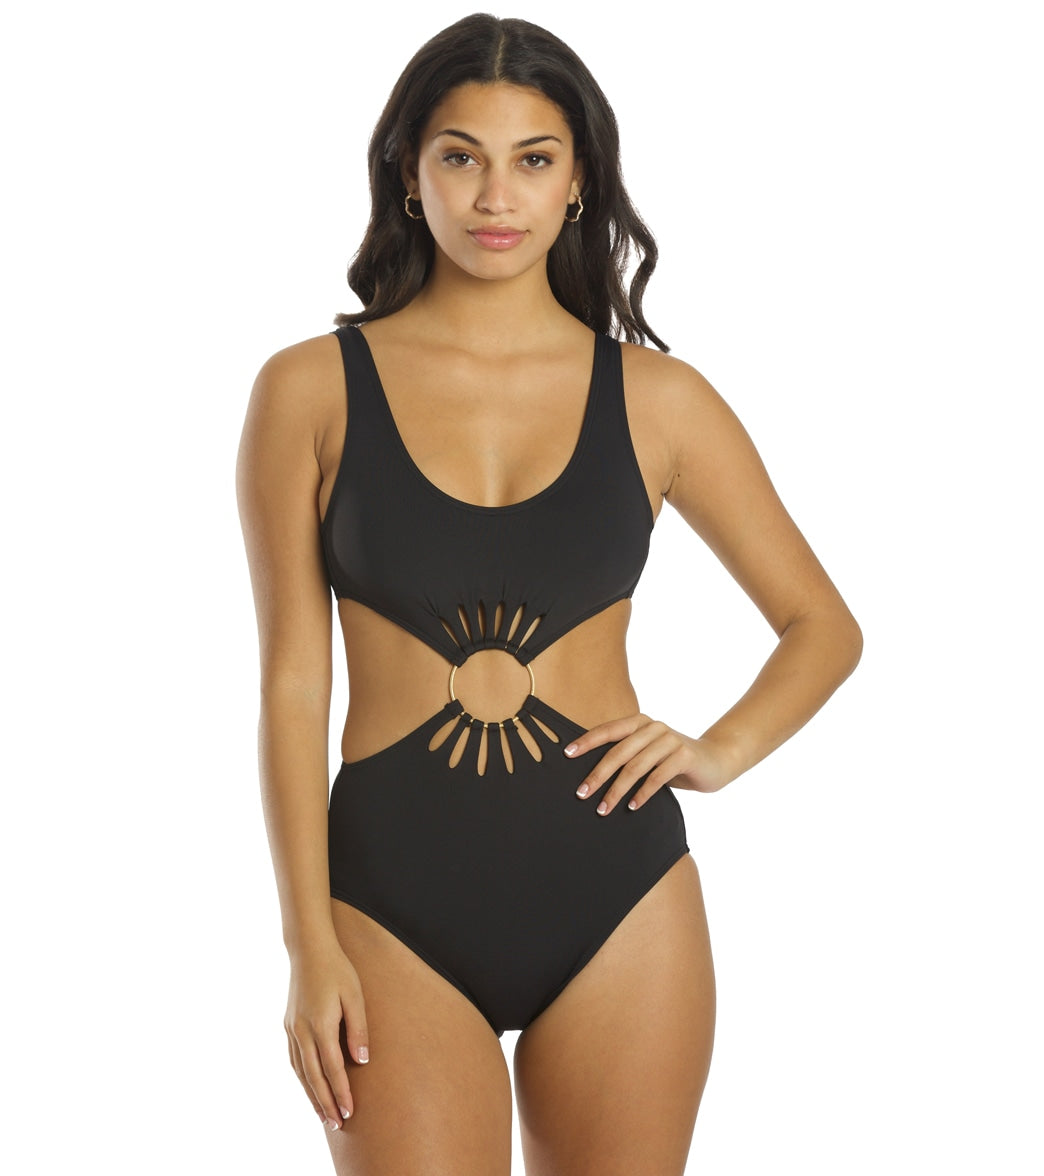 Vince Camuto Womens Serengeti Shades Logo Ring Cut Out Scoopneck One Piece Swimsuit